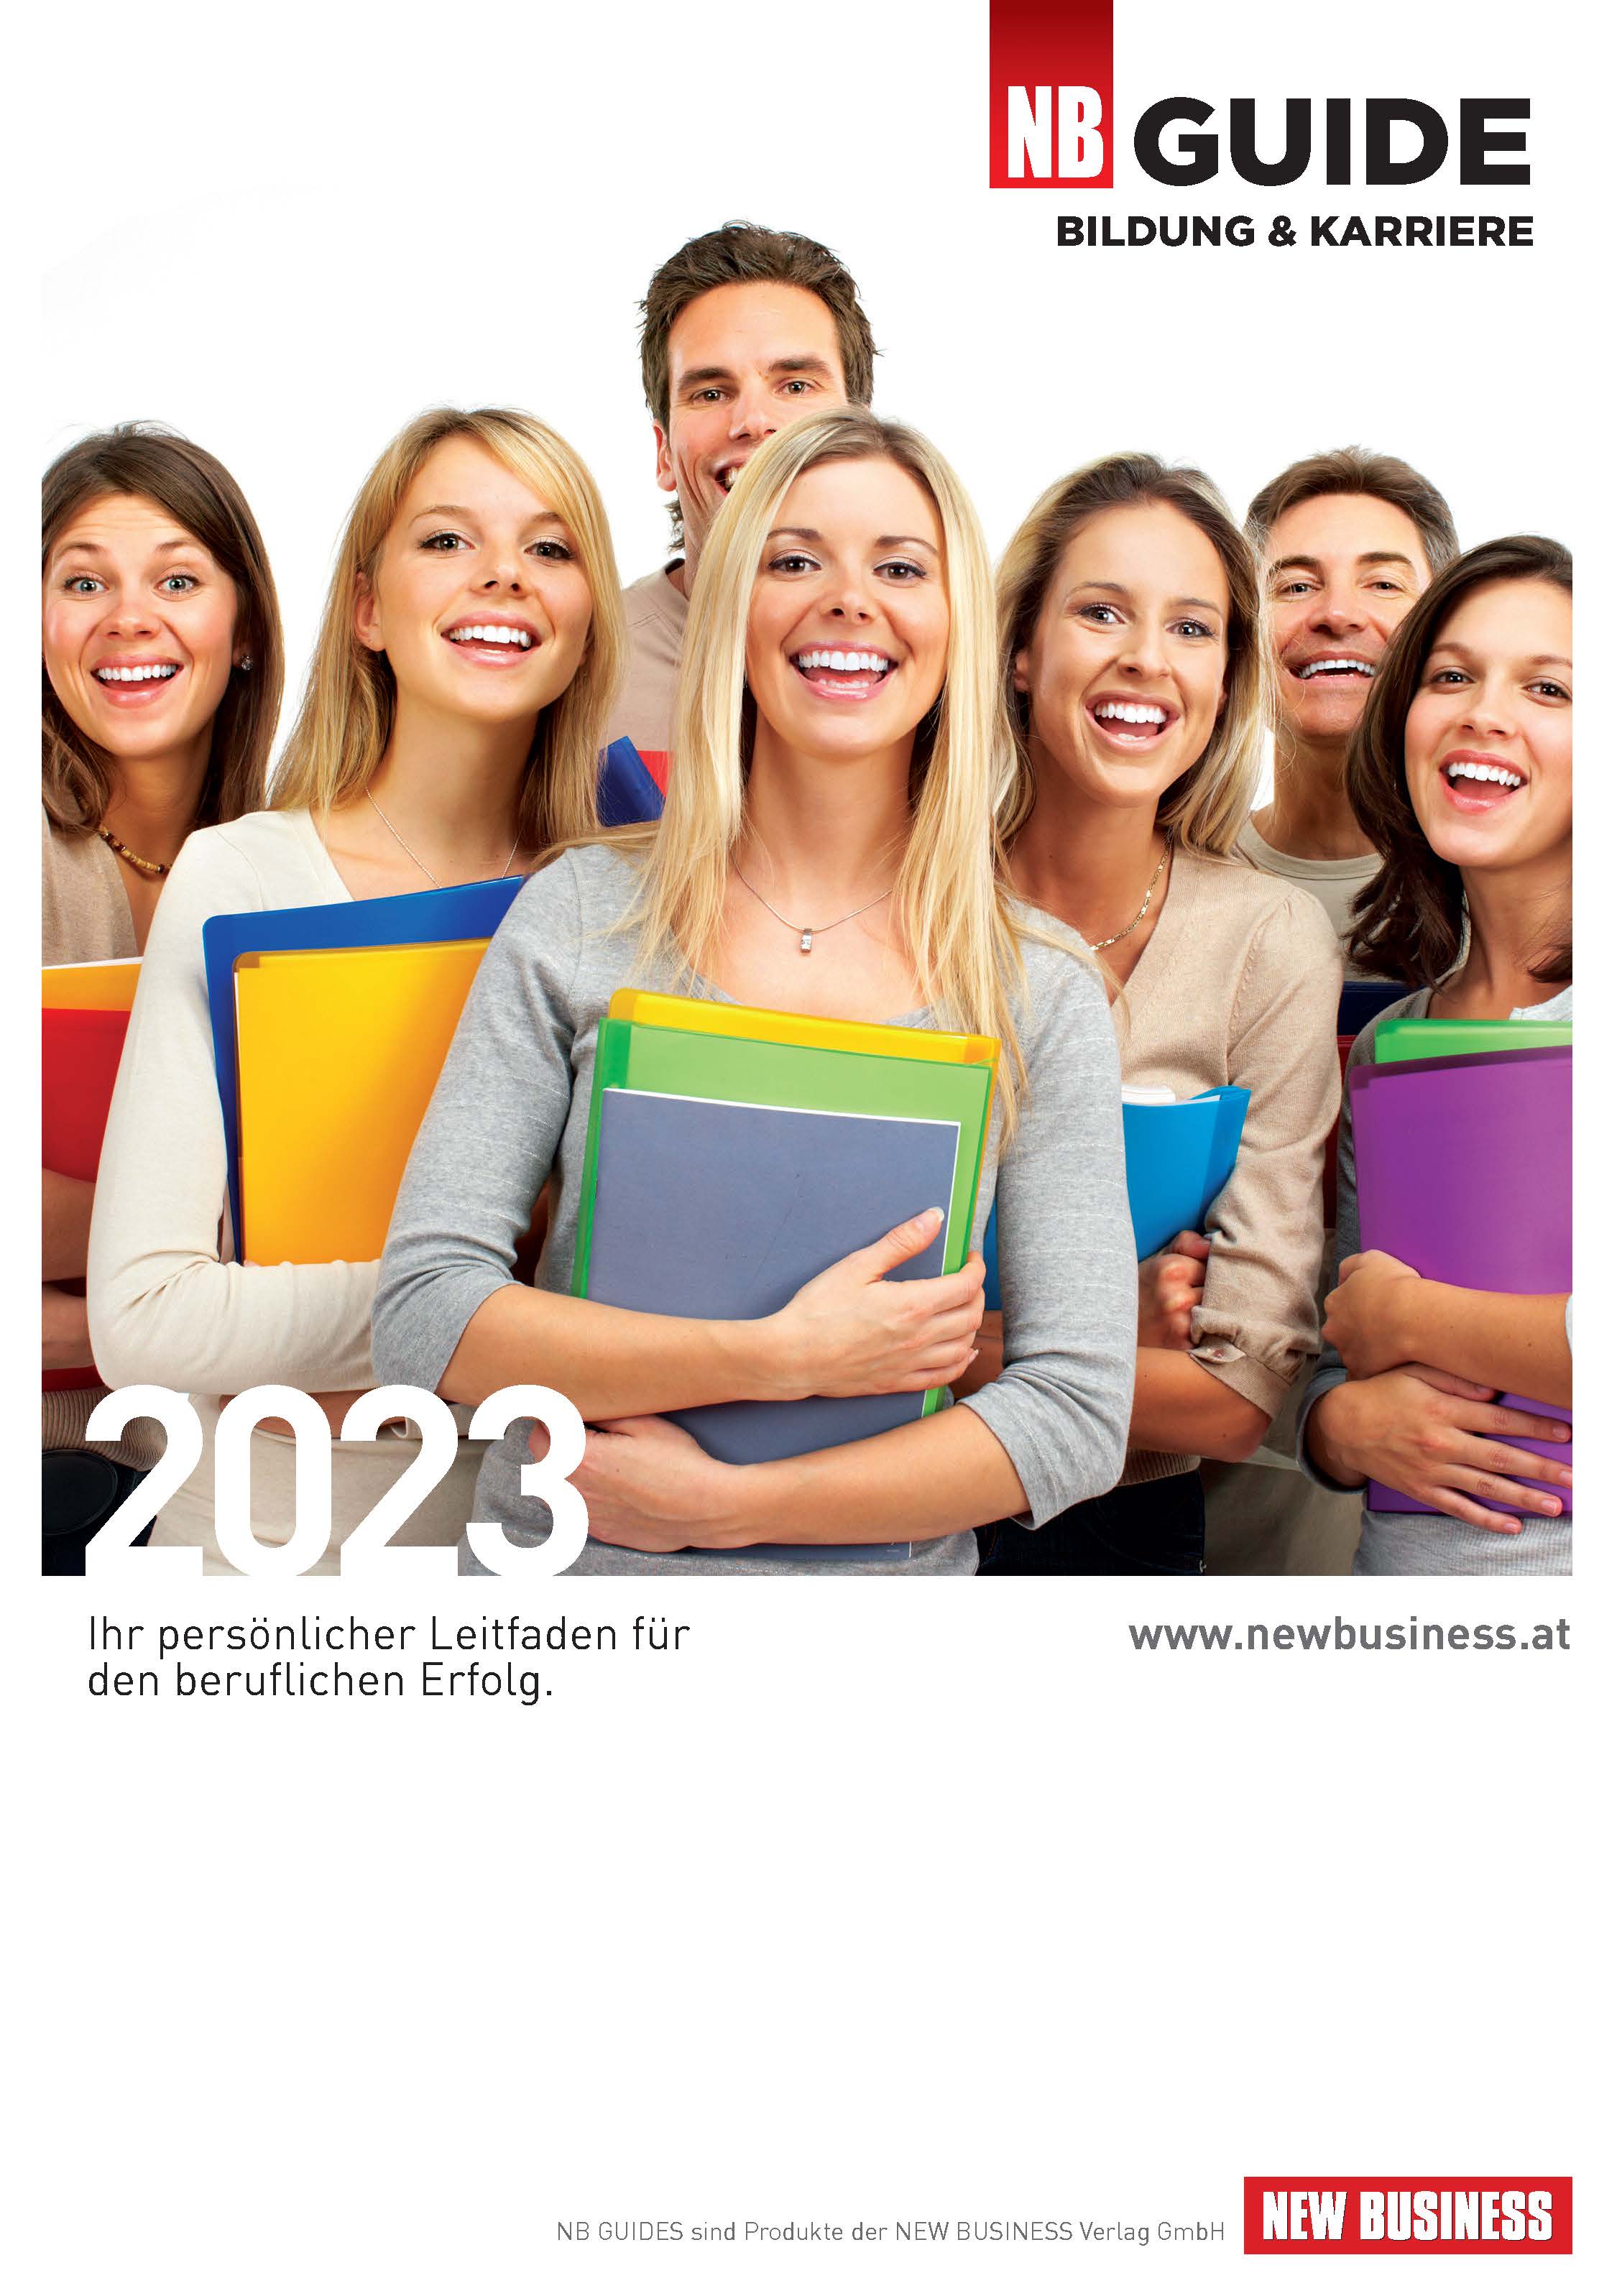 Cover: NEW BUSINESS Guides - BILDUNGS- & KARRIERE-GUIDE 2023